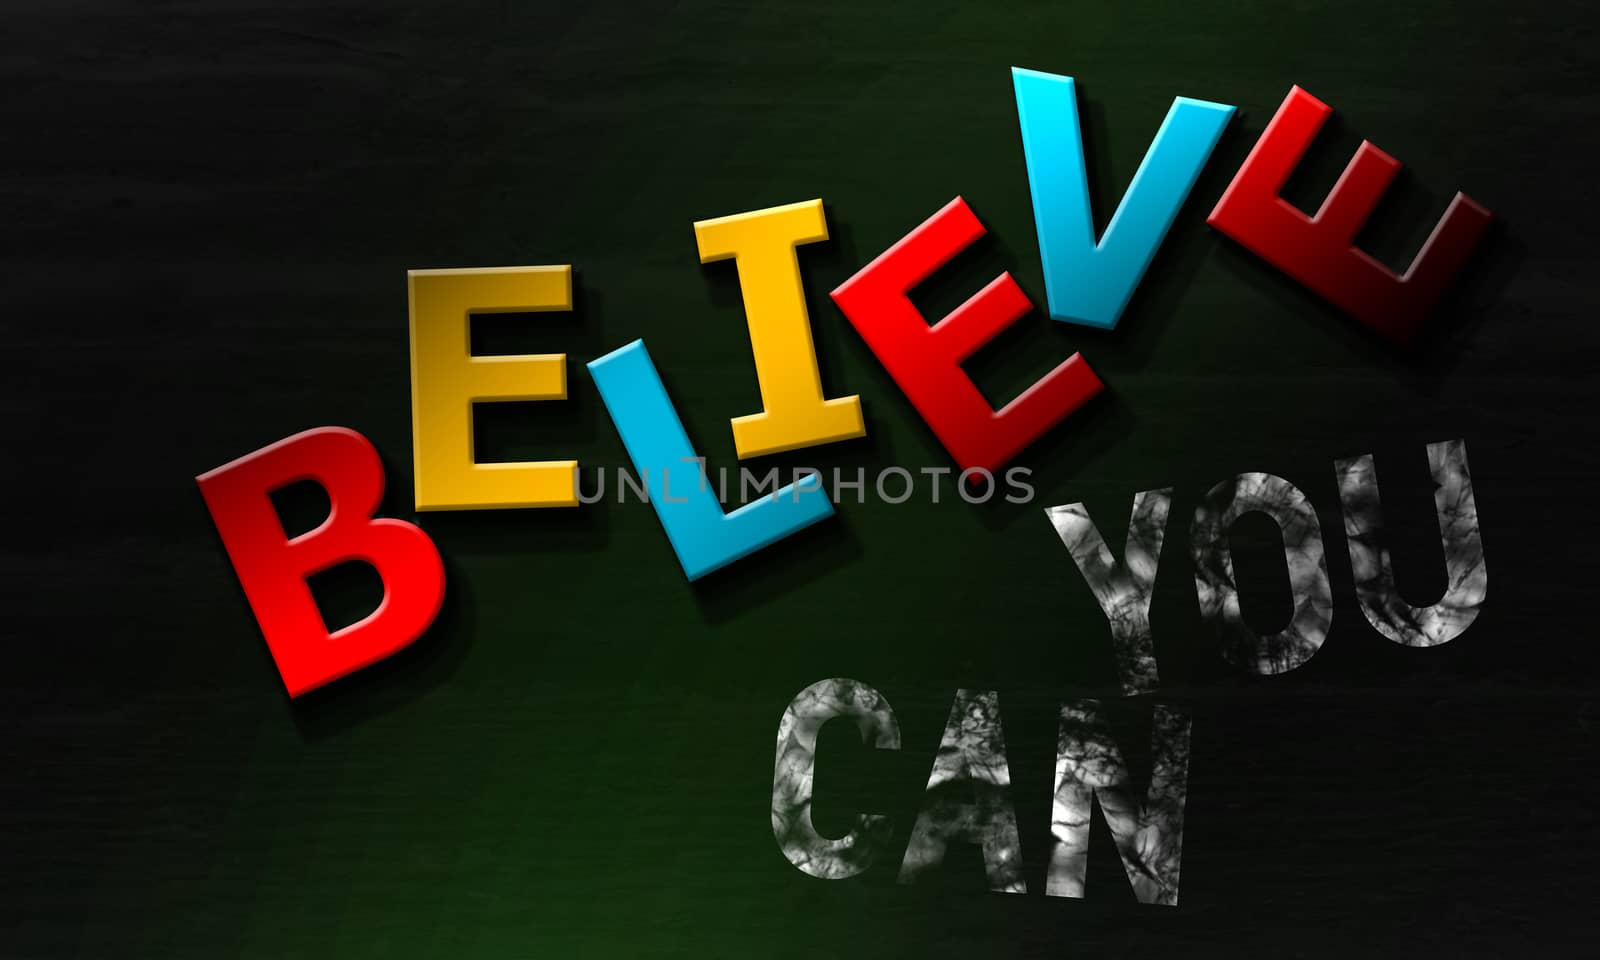 Believe you can inspirational quote with colorful text by tang90246